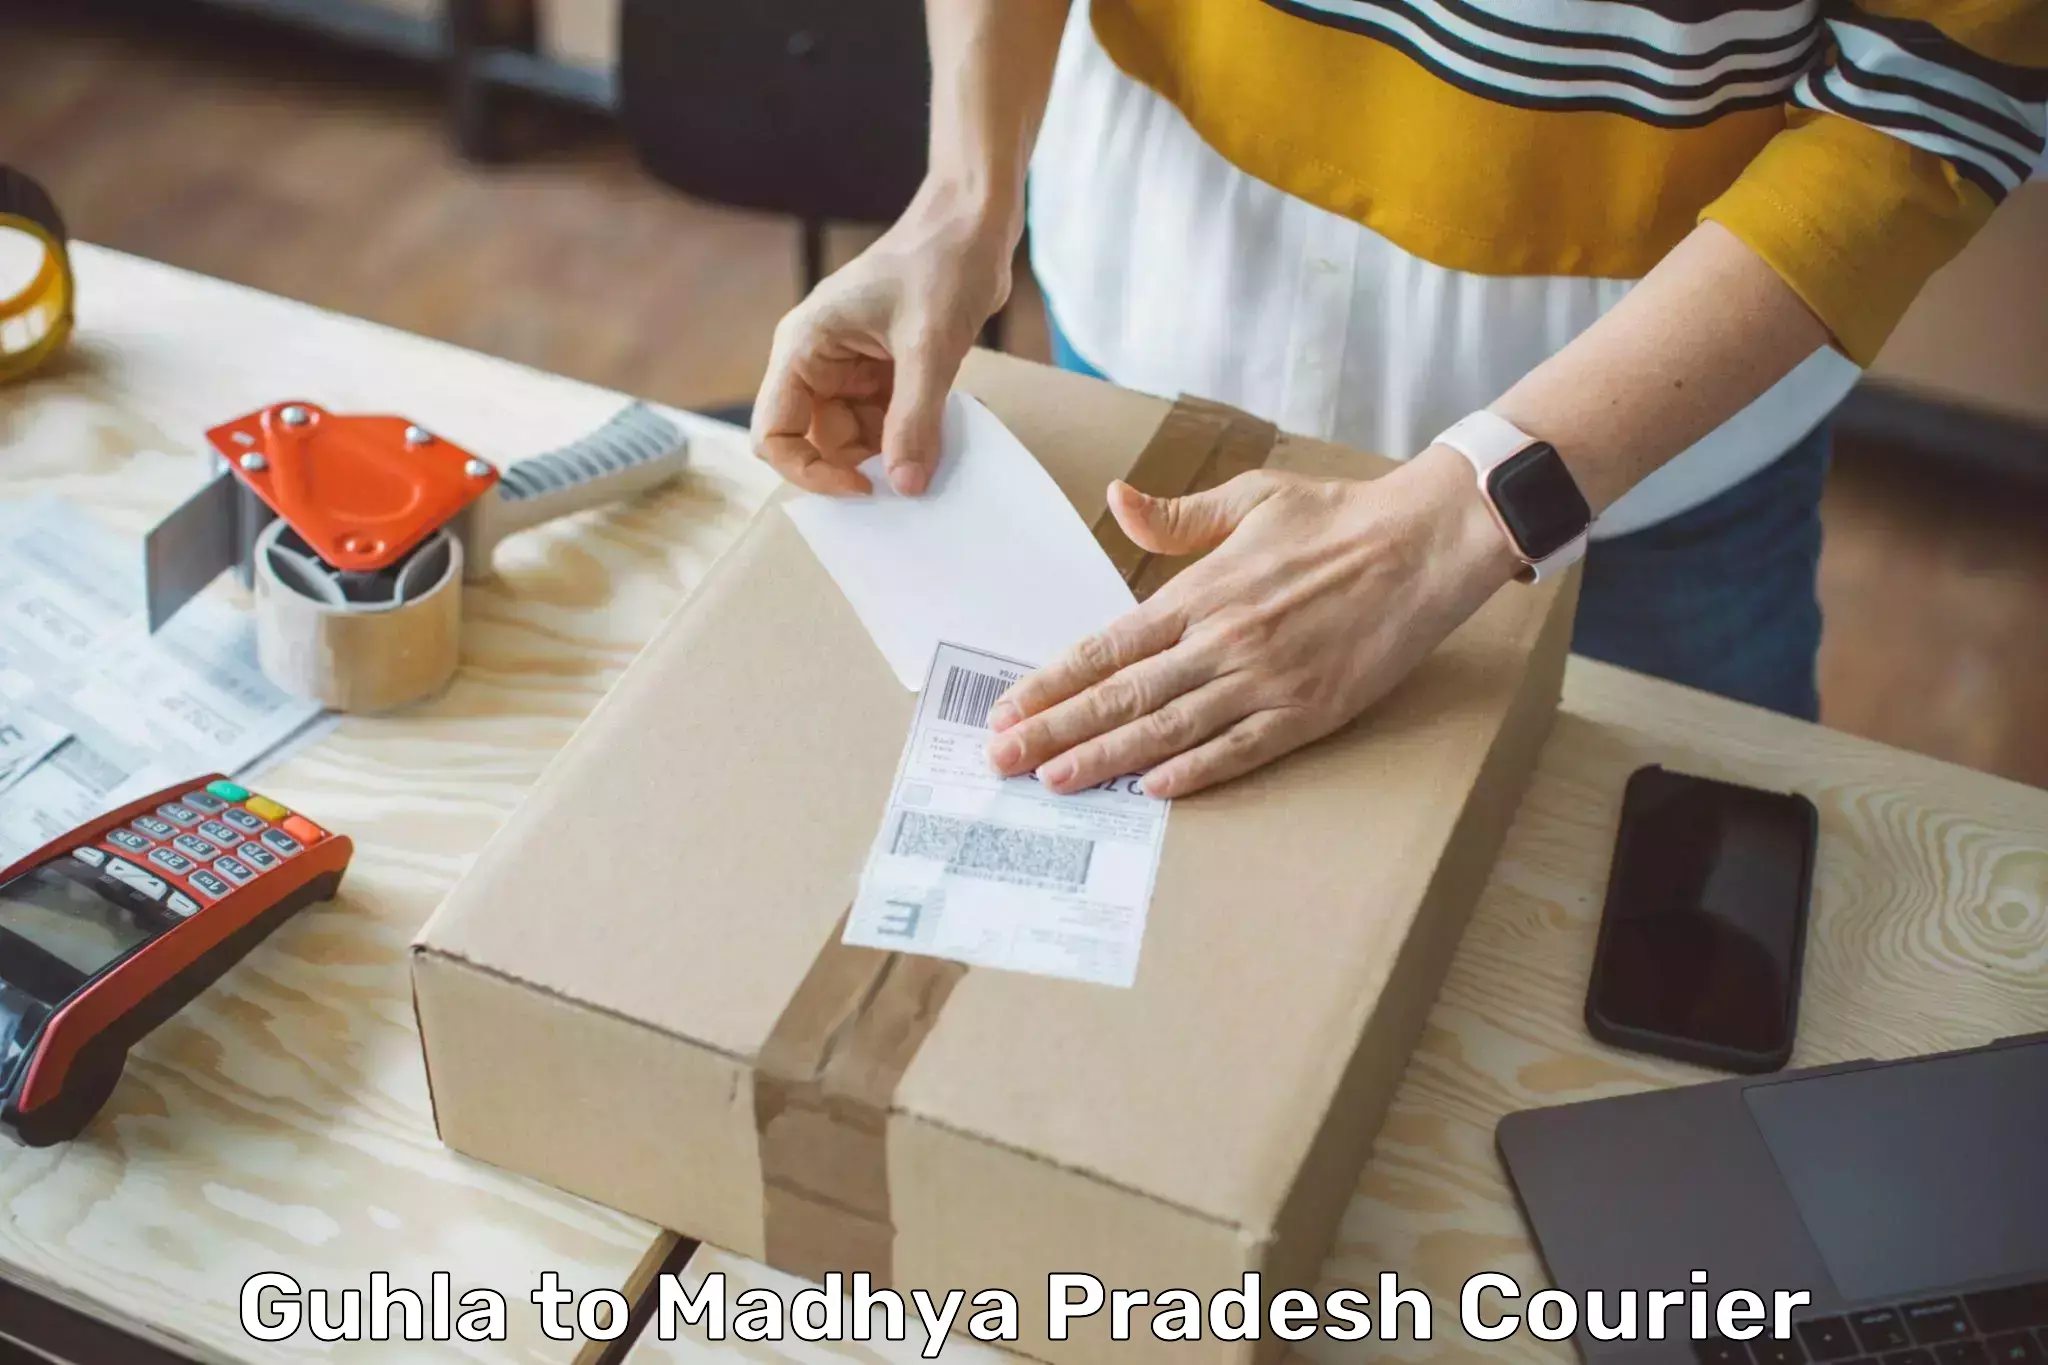 Personal courier services Guhla to Lavkush Nagar